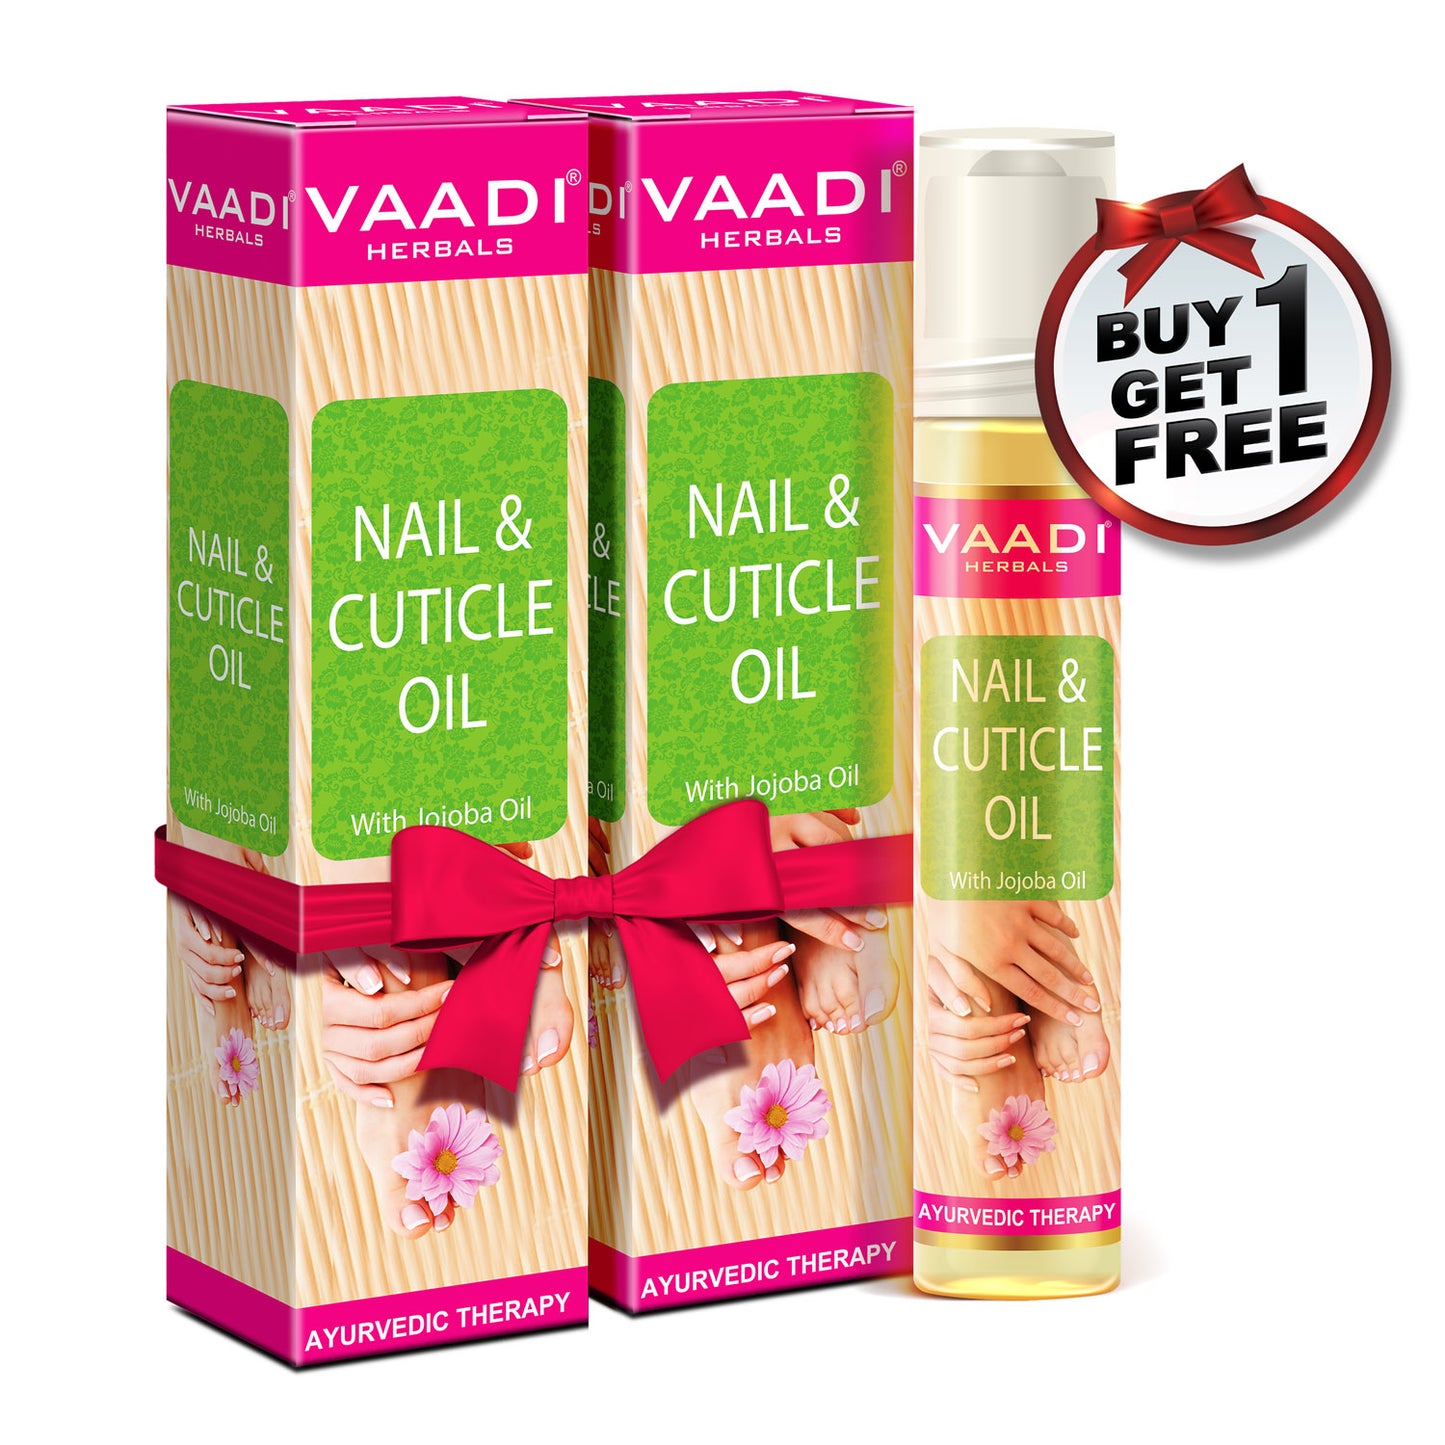 Organic Nail & Cuticle Oil with Jojoba Oil - Heals Redness & Pain - Strengthens Thin & Brittle Nails (10 ml/ 0.4 fl oz) (Buy 1 Get 1 Free)